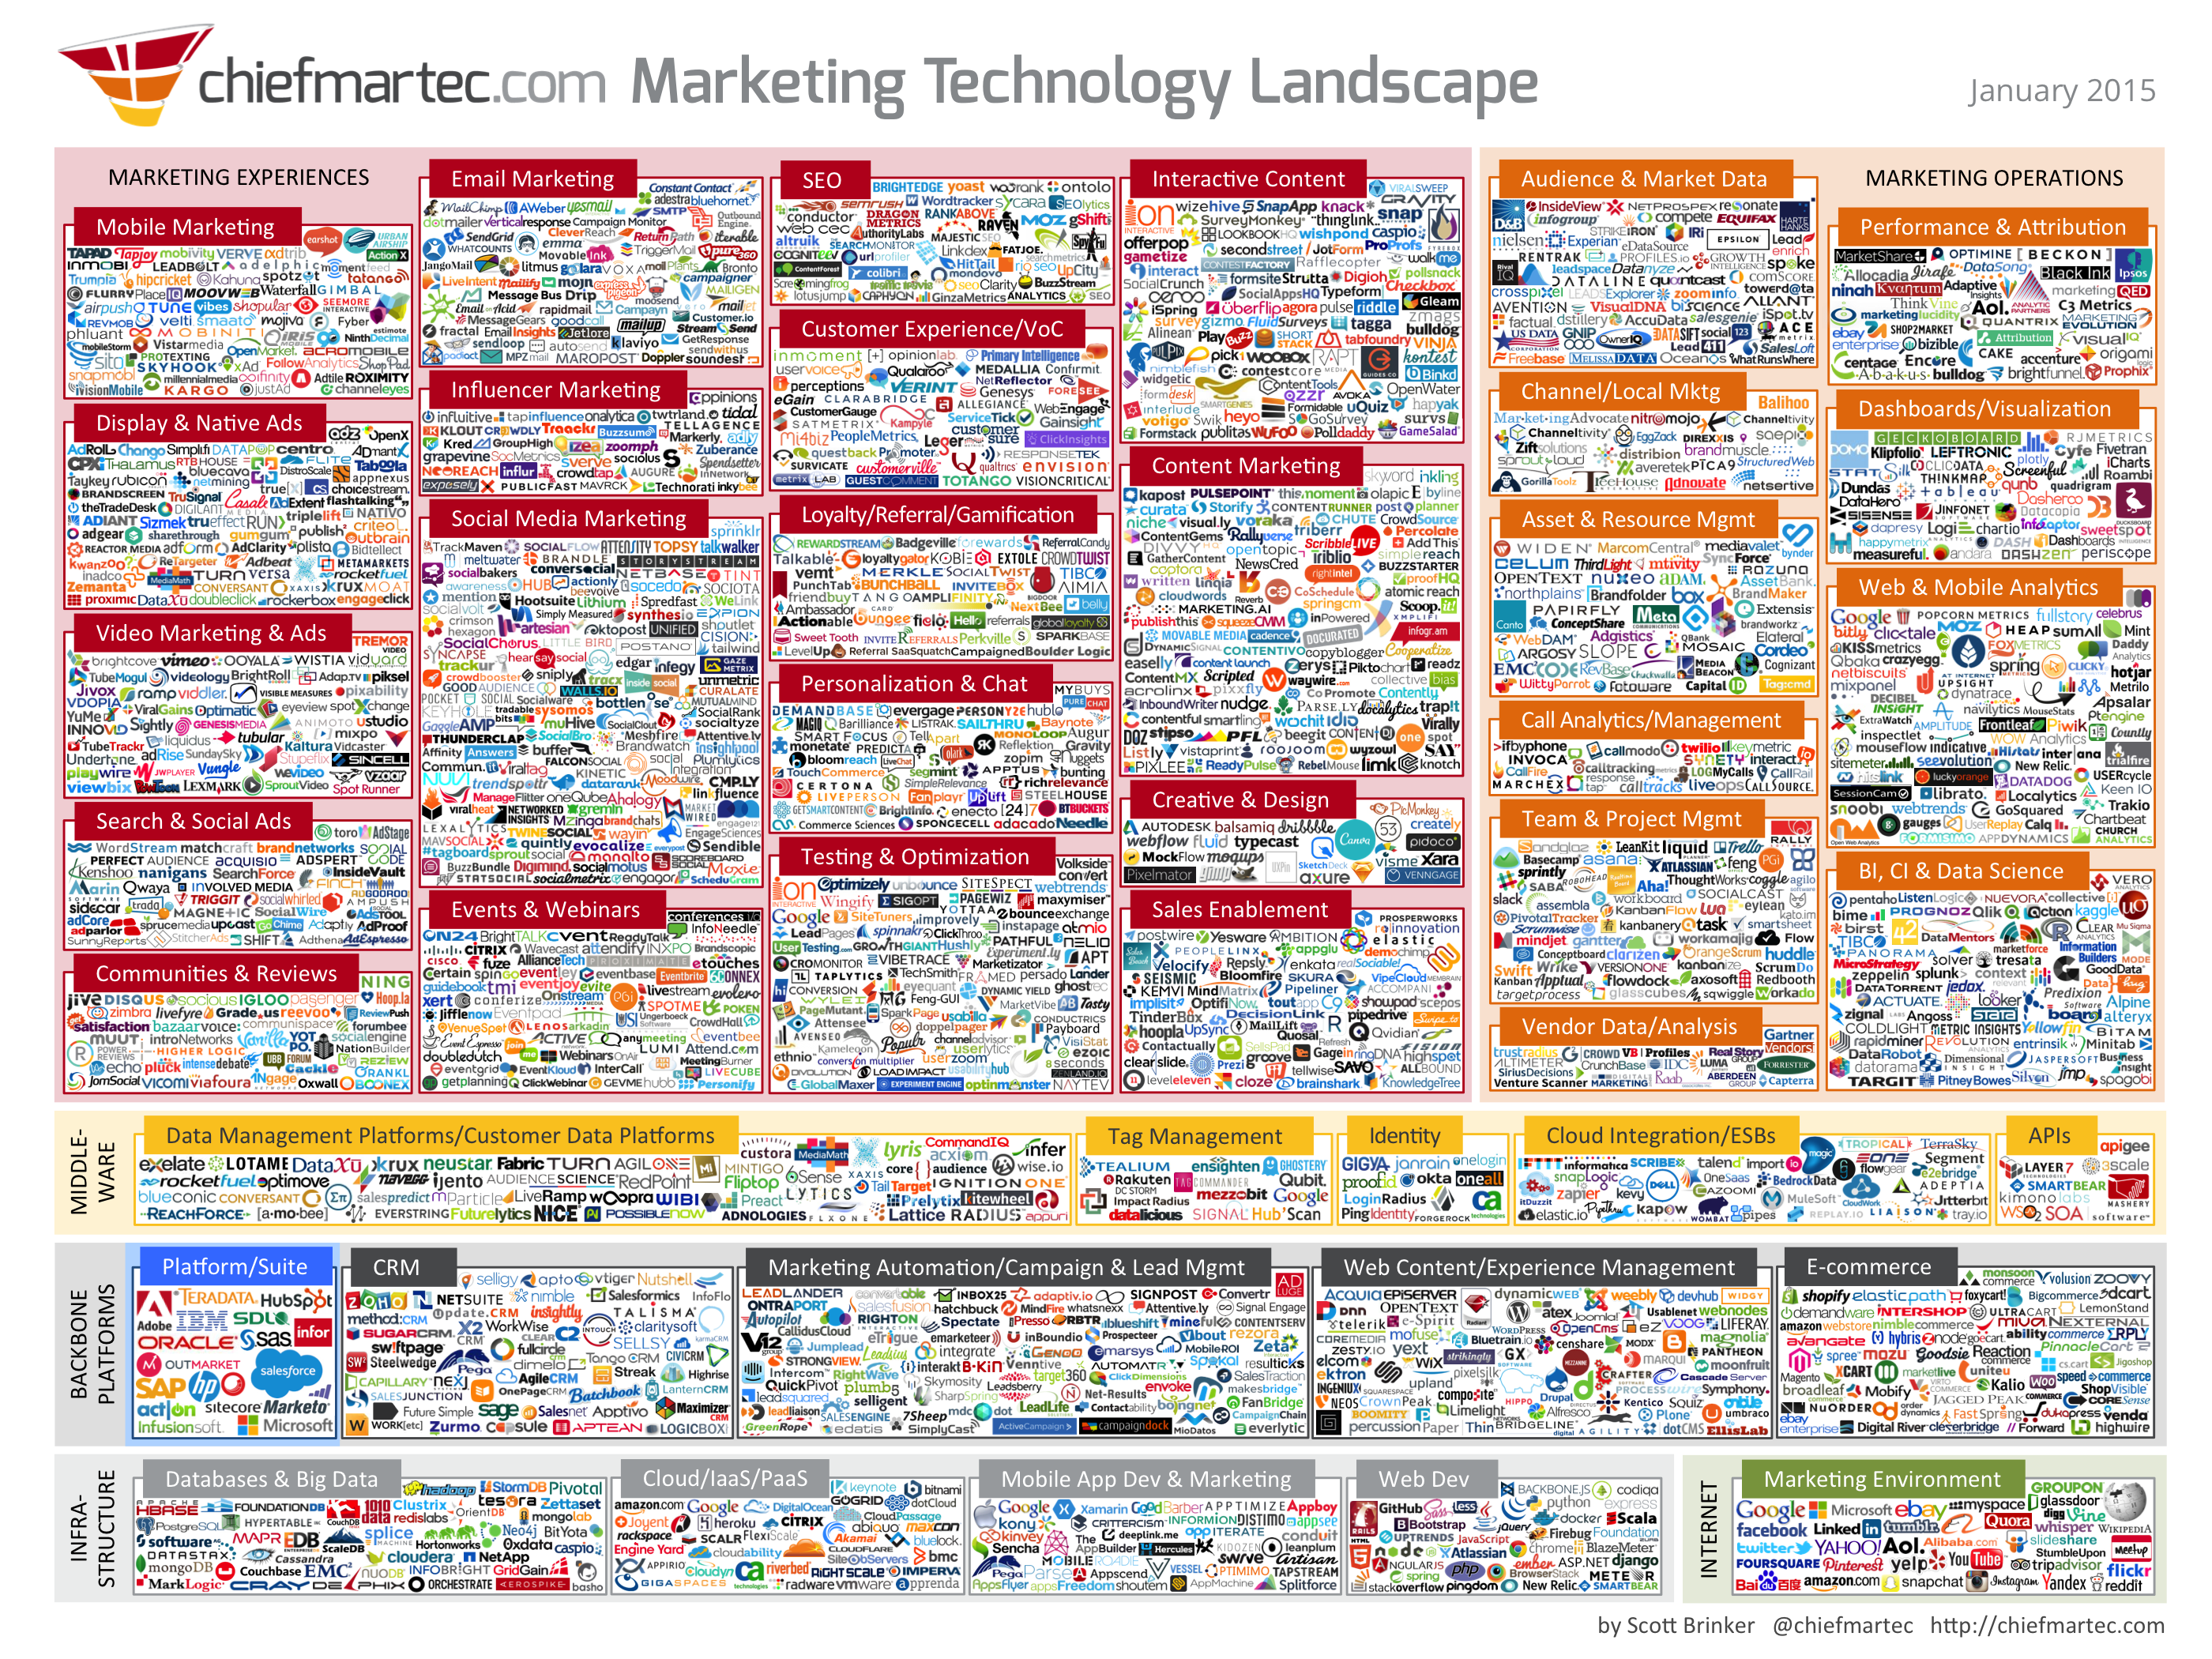 3 Things To Look For When Investing In, Marketing Technology Landscape 2019